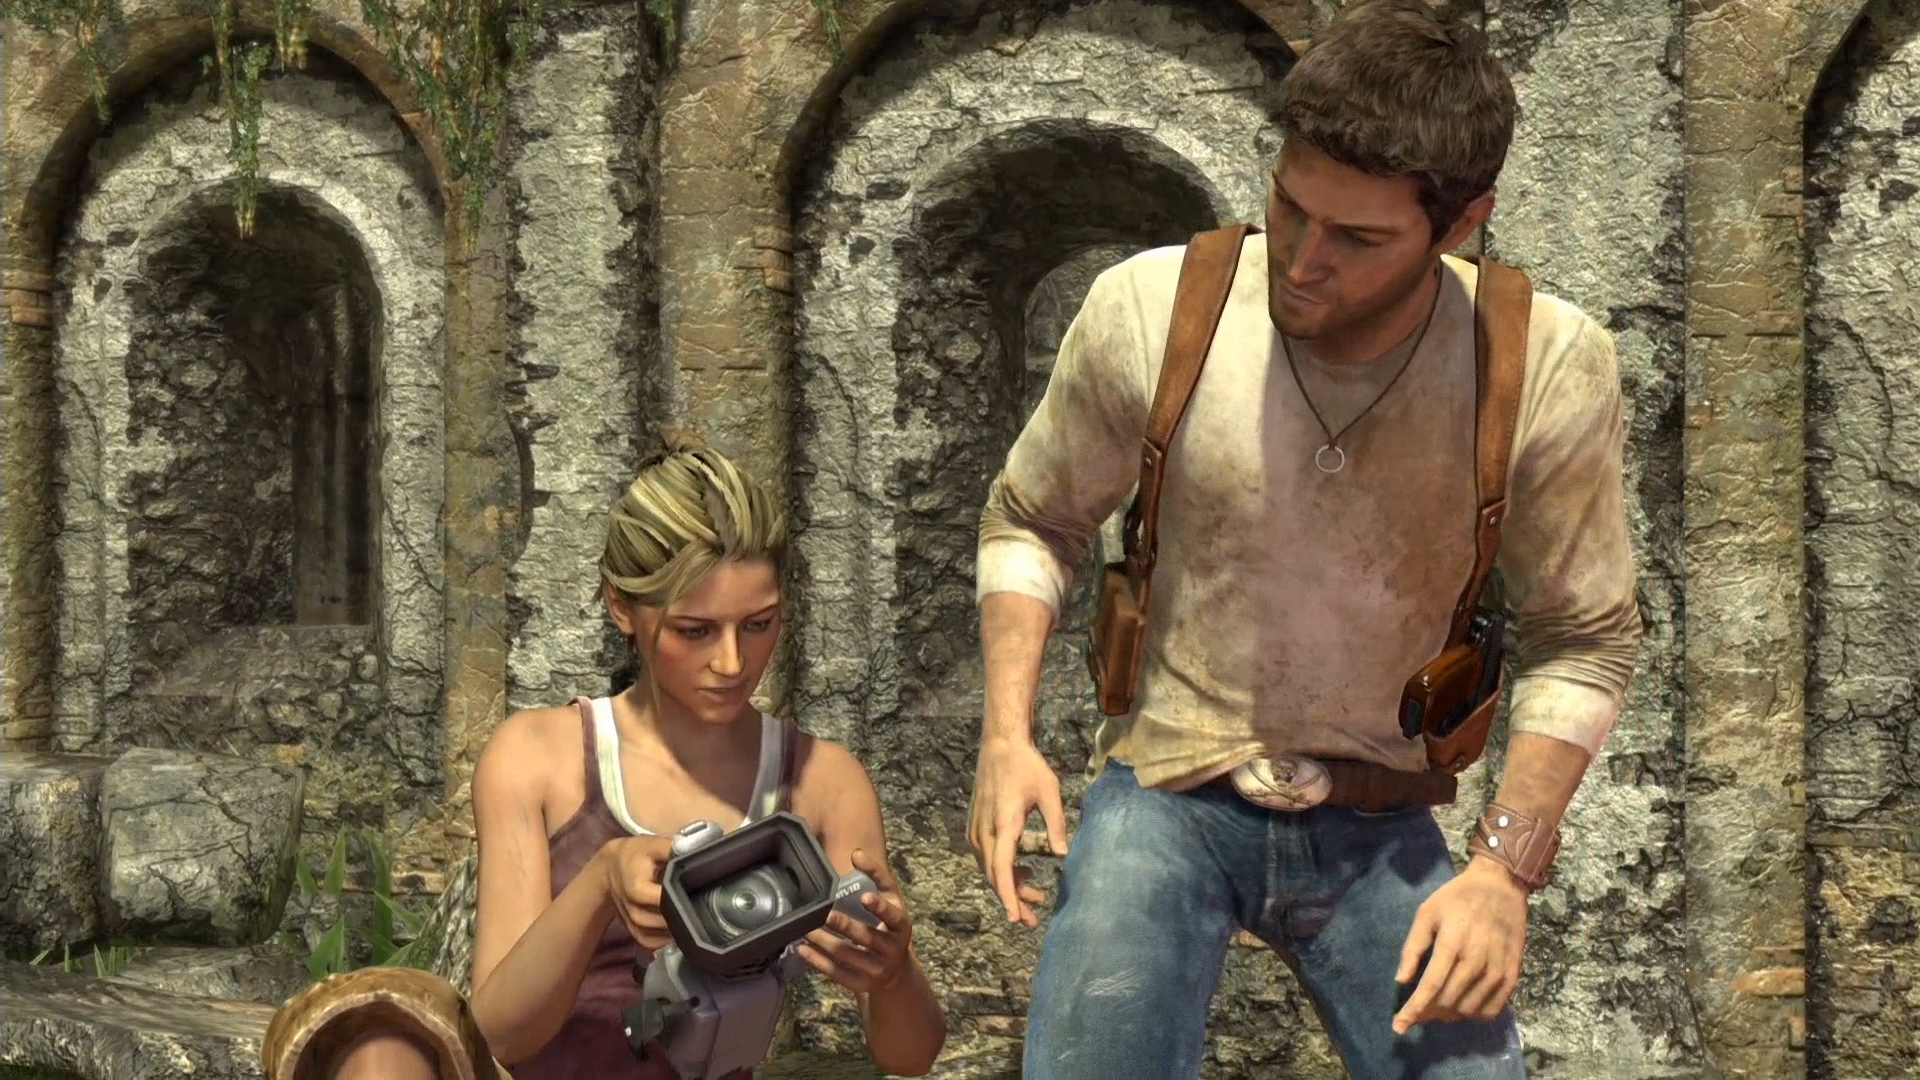 uncharted-the-nathan-drake-collection-drakes-fortune-_00_02_53_15_still016.png